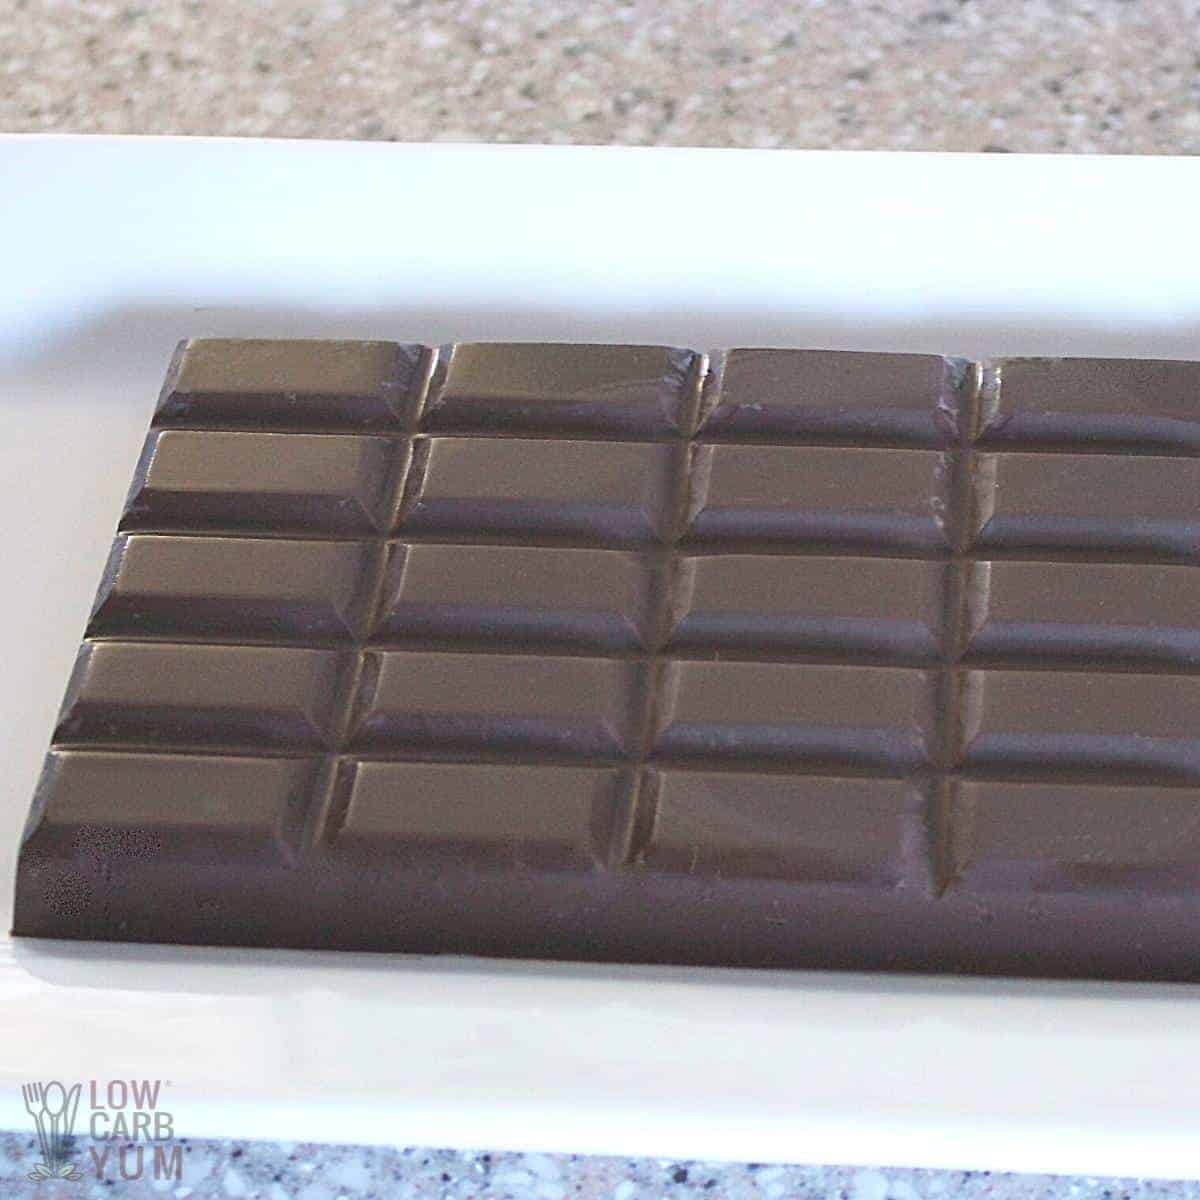 spiegel Afkorting Betuttelen Sugar Free Chocolate Recipe Made with Stevia - Low Carb Yum